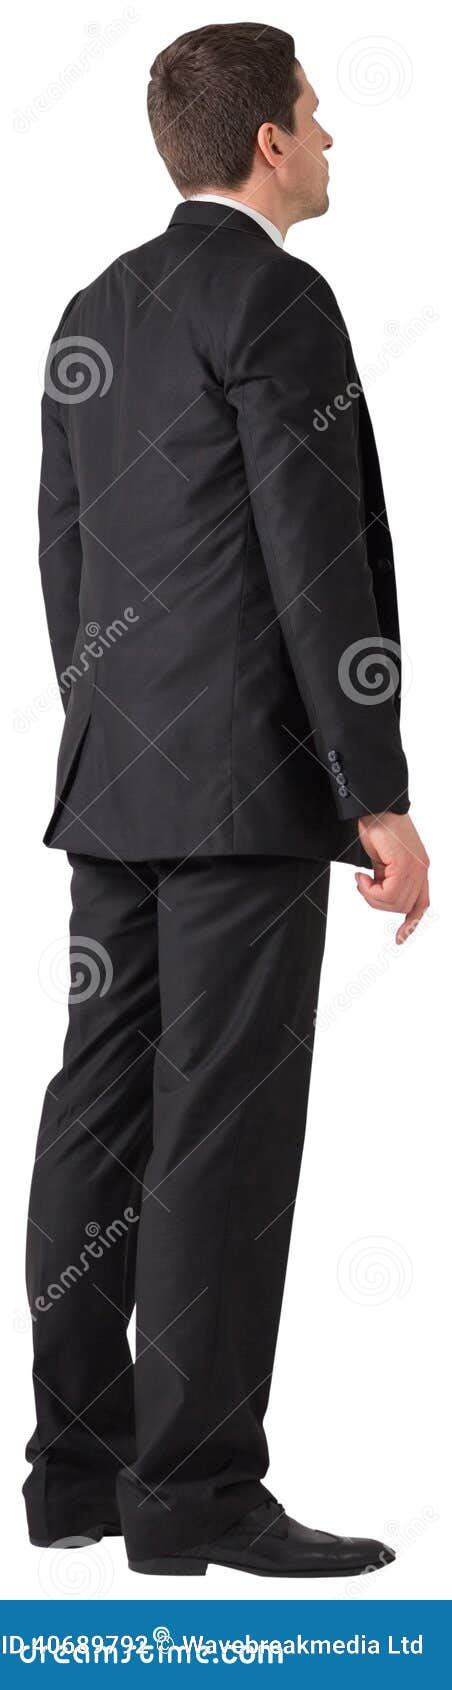 Handsome Businessman Looking With Back To Camera Stock Photo Image Of